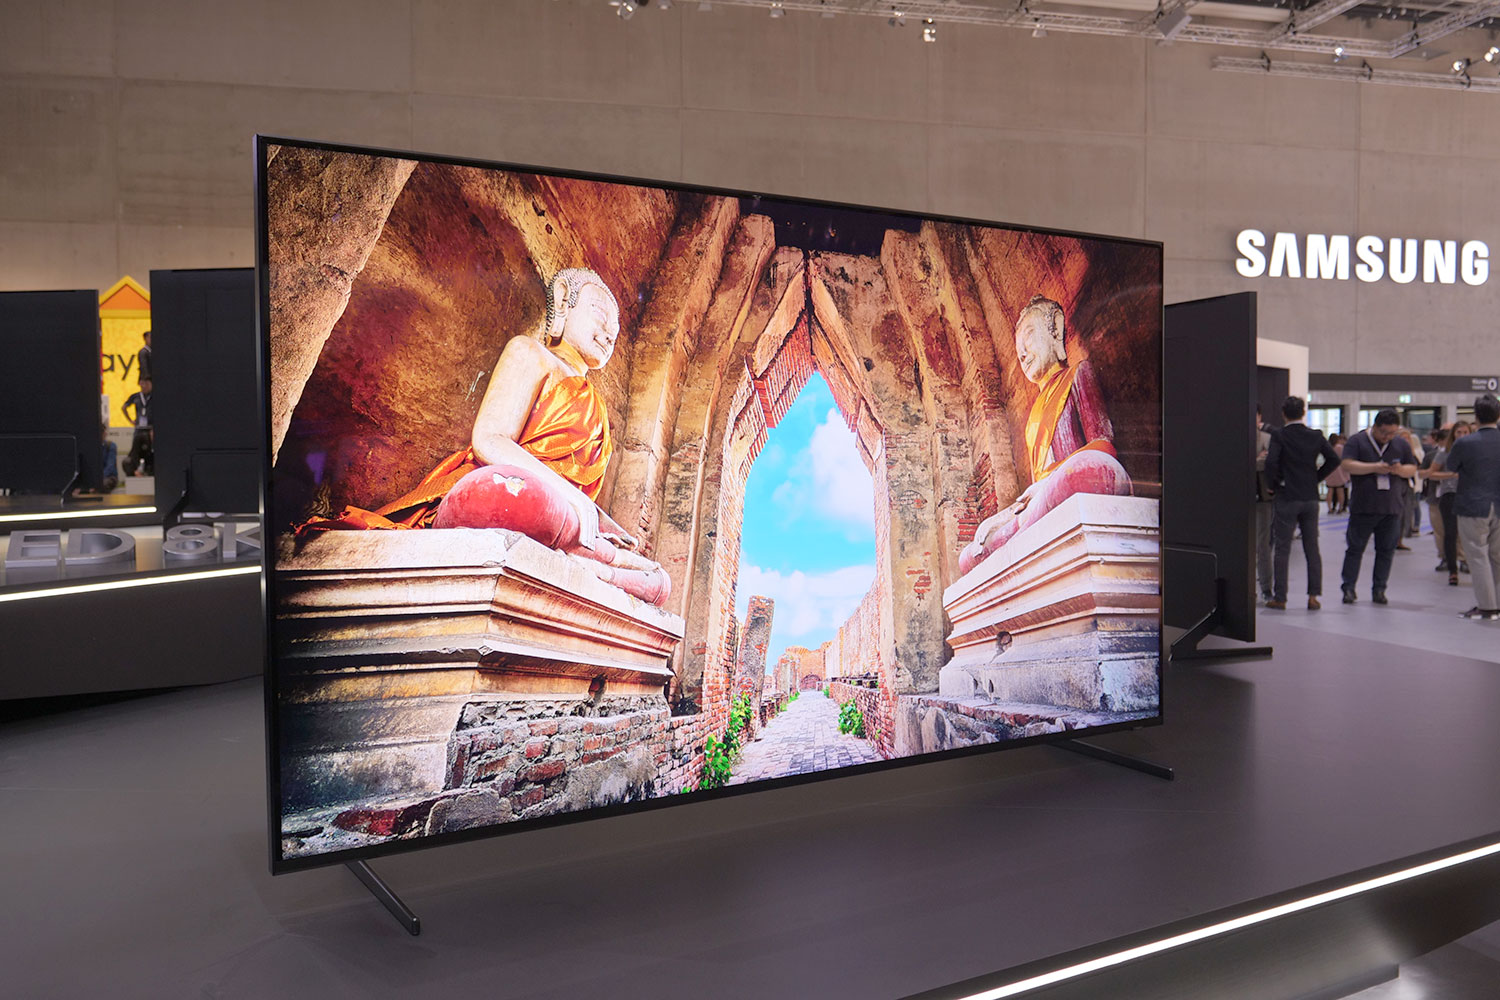 Samsung's 85inch Q900R 8K QLED Now Available for PreOrder Digital Trends